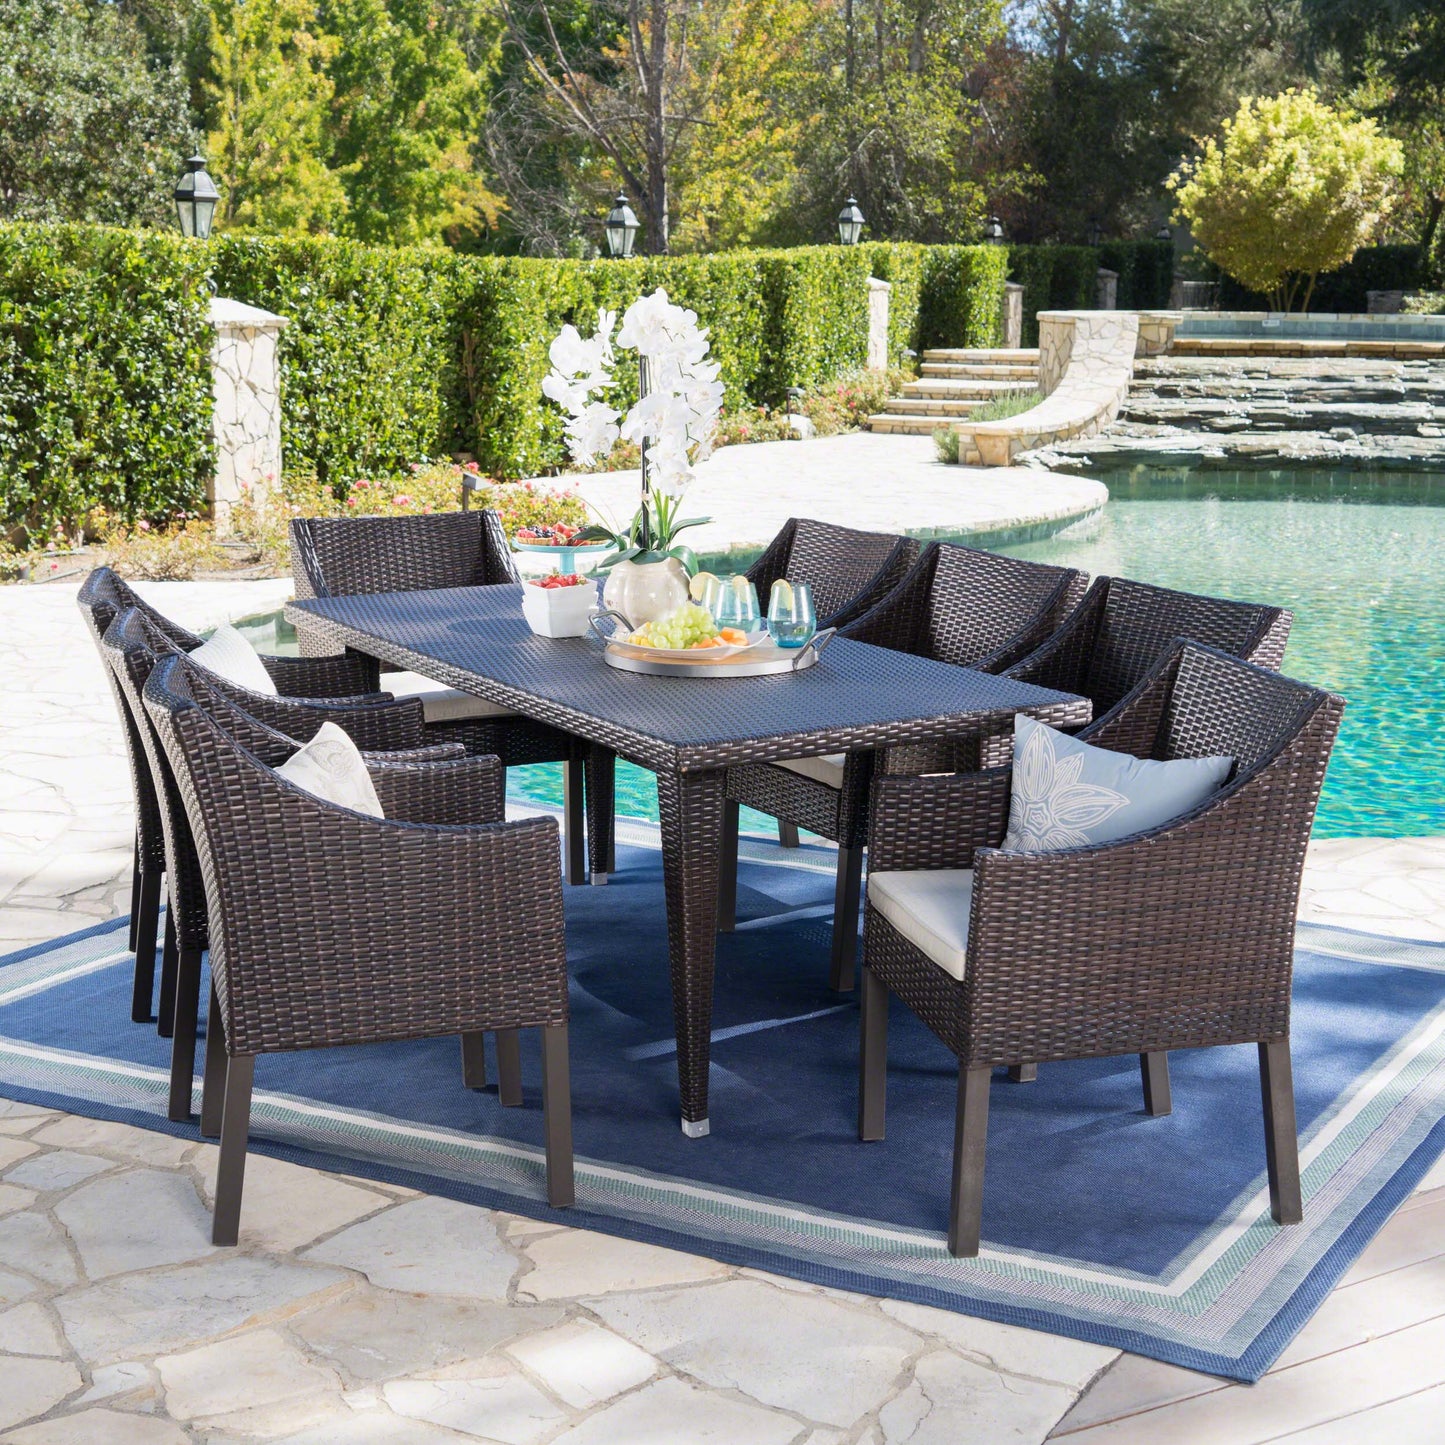 Alanna Outdoor 9 Piece Wicker Dining Set with Water Resistant Cushions